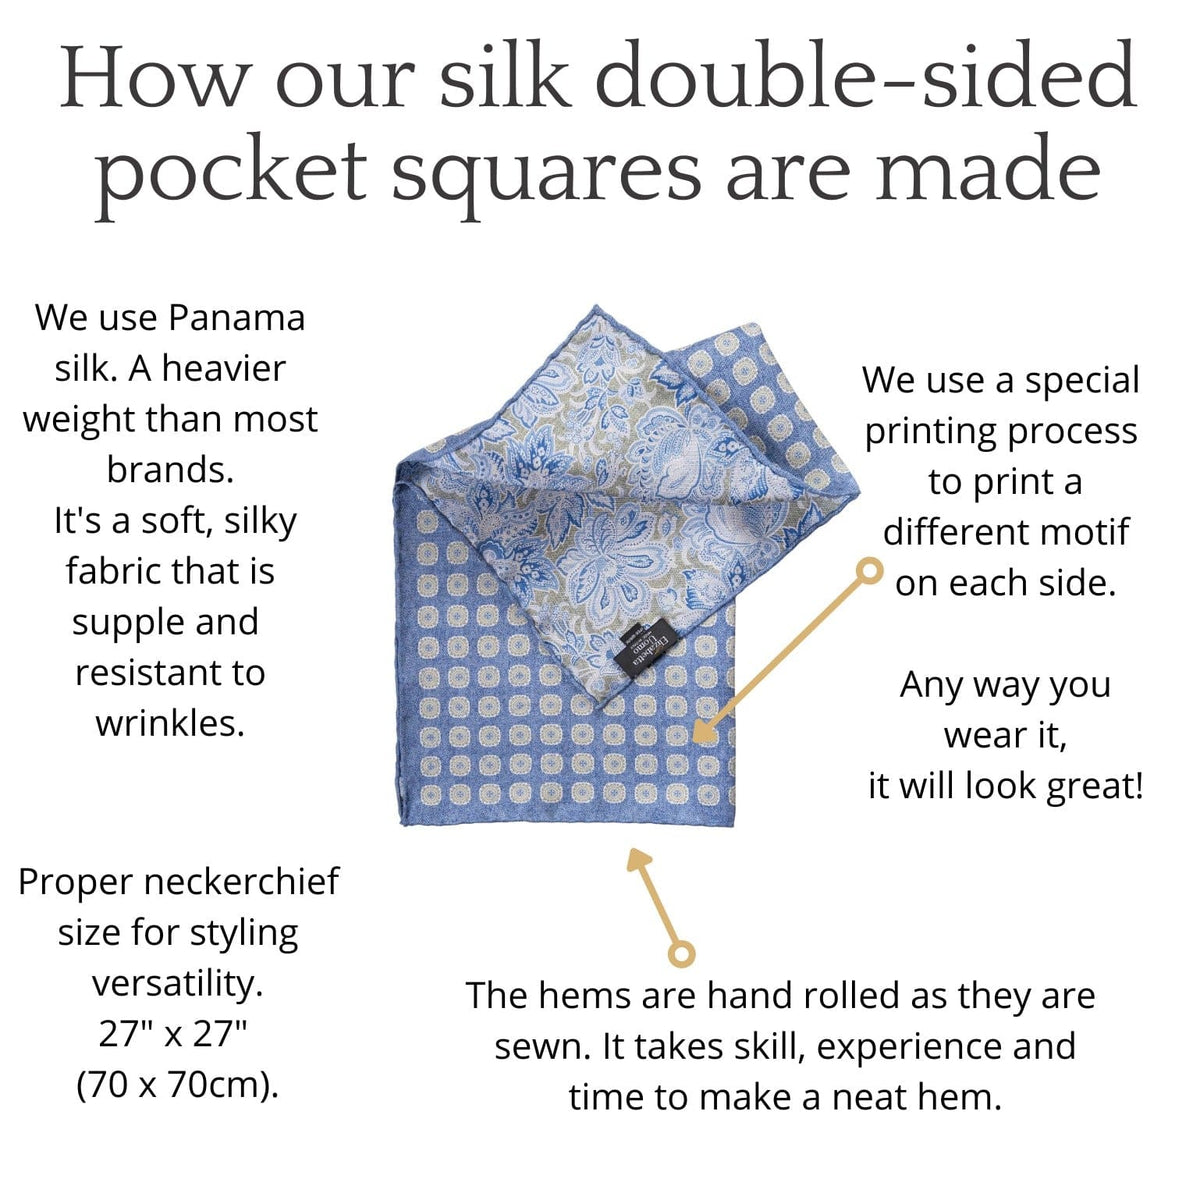 How an Elizabetta pocket square is made